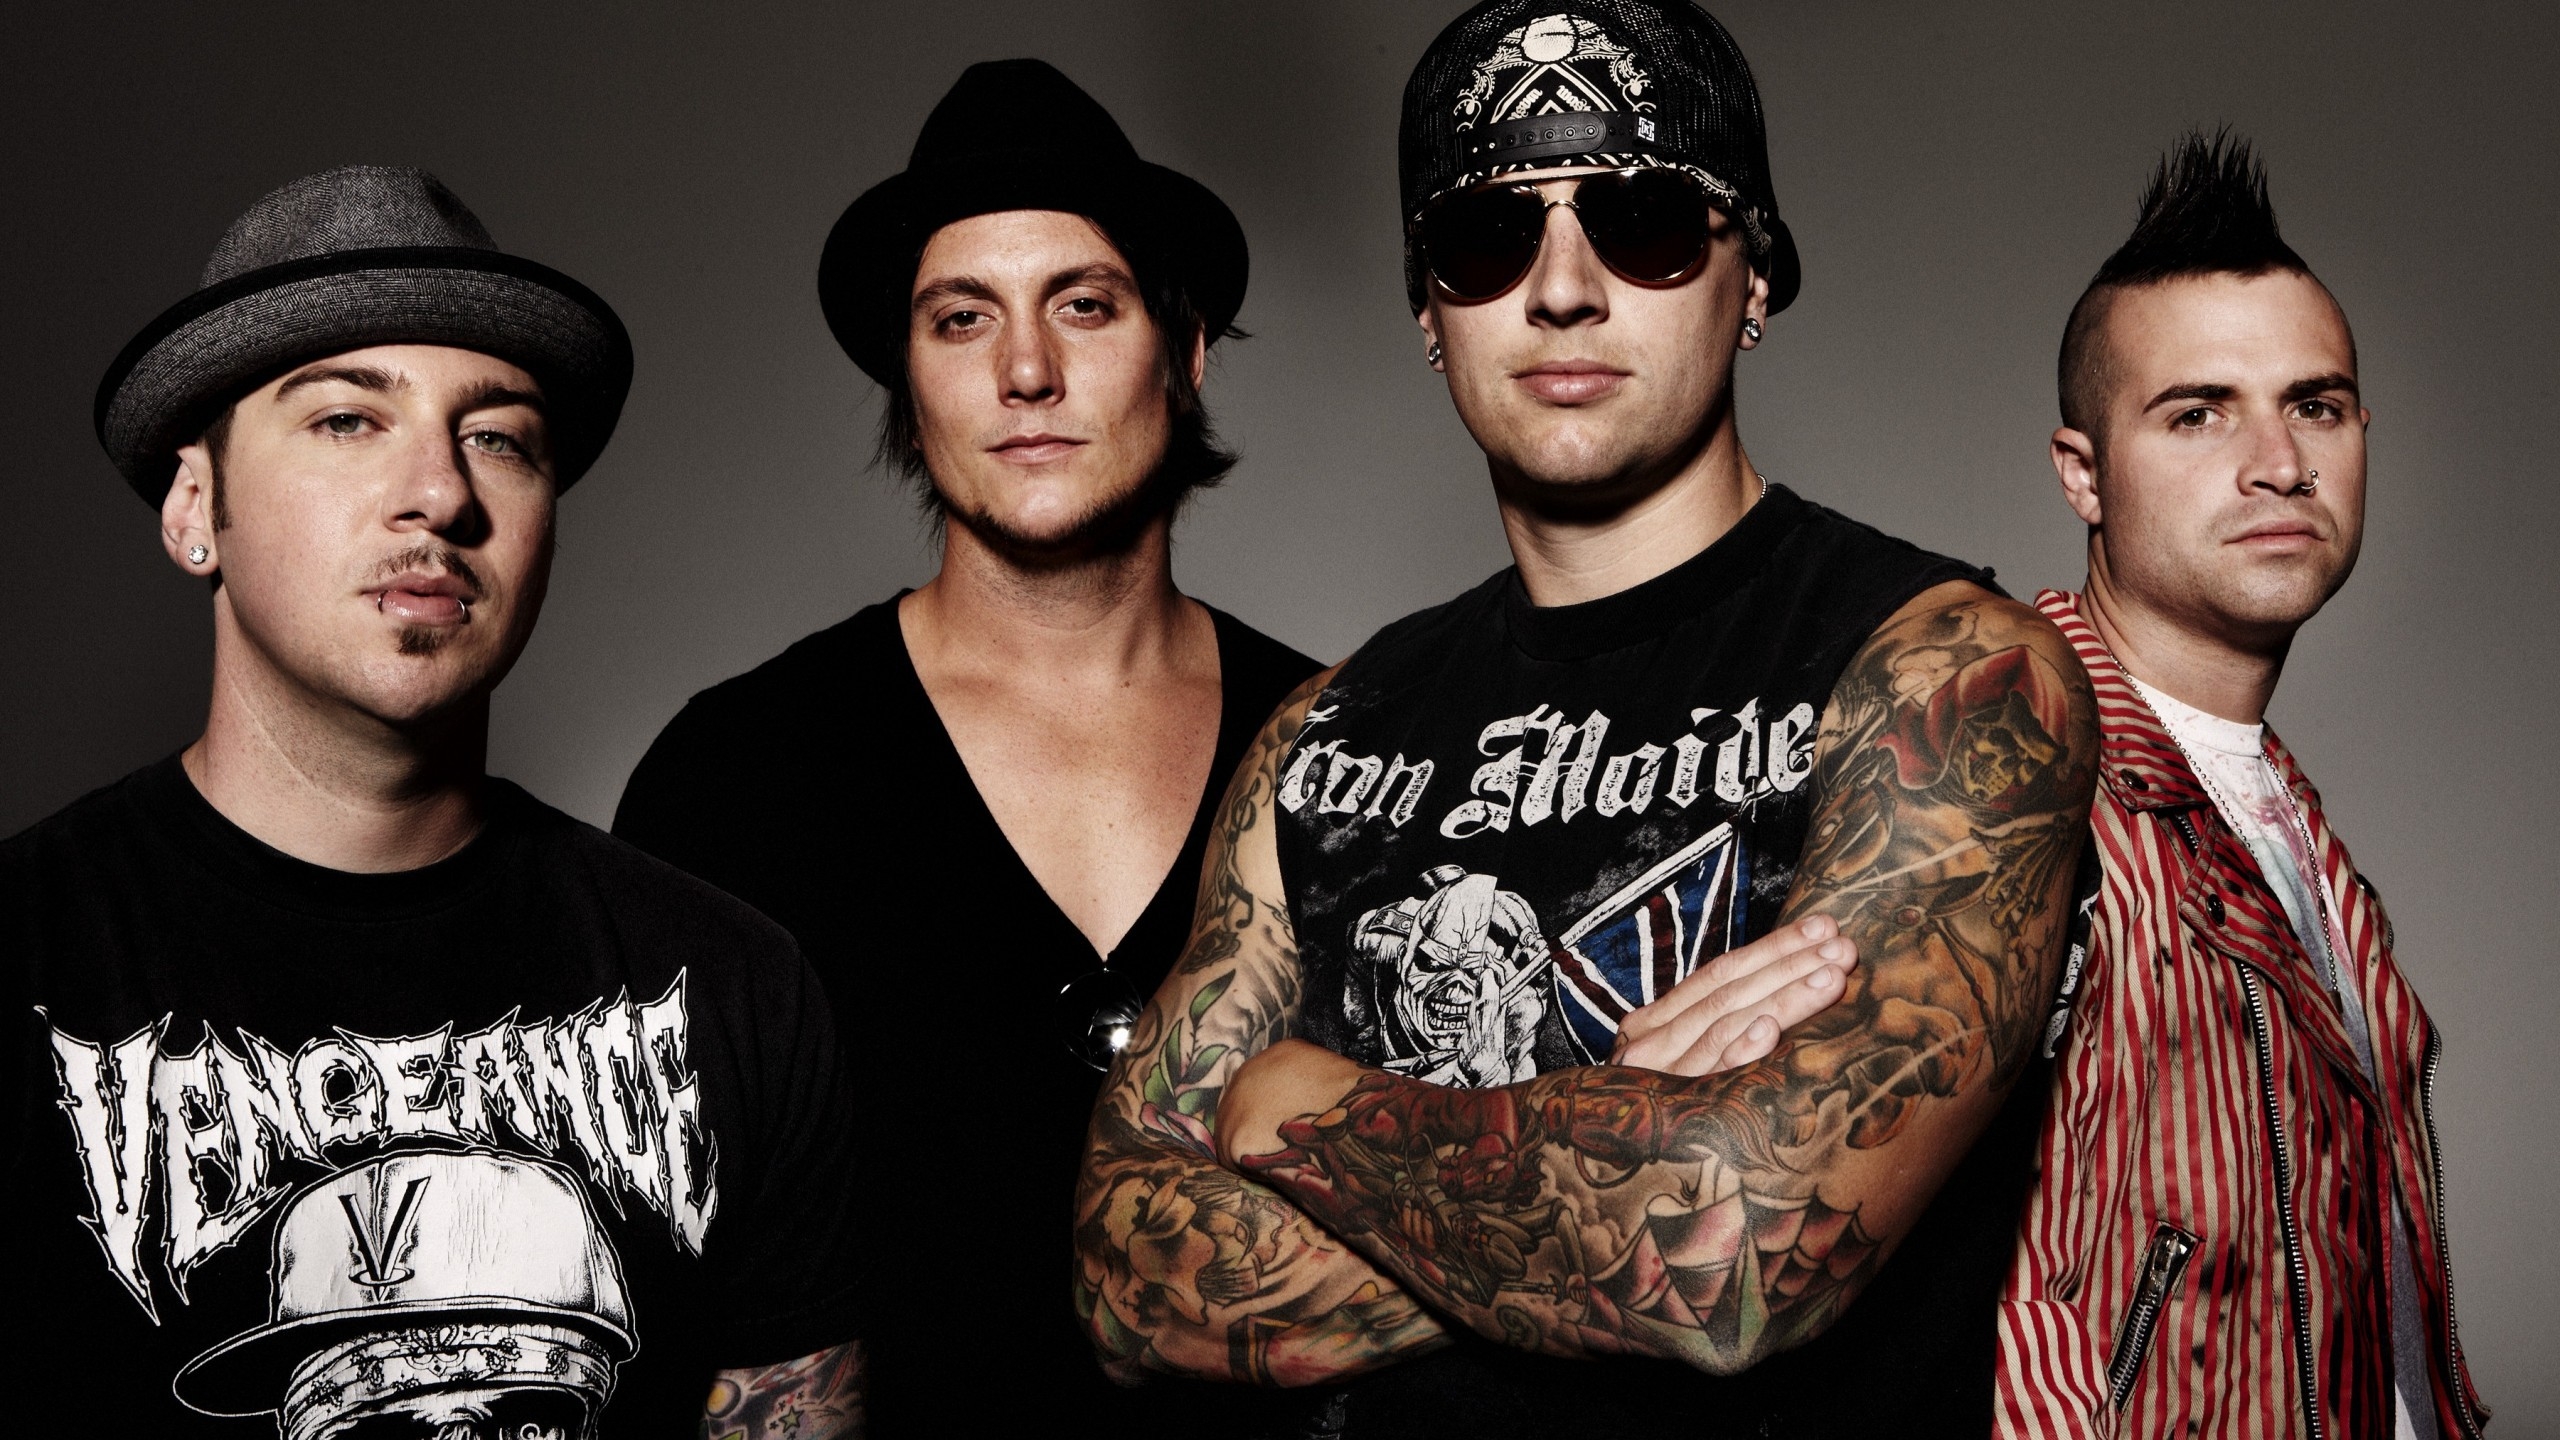 Avenged Sevenfold A7X for 2560x1440 HDTV resolution